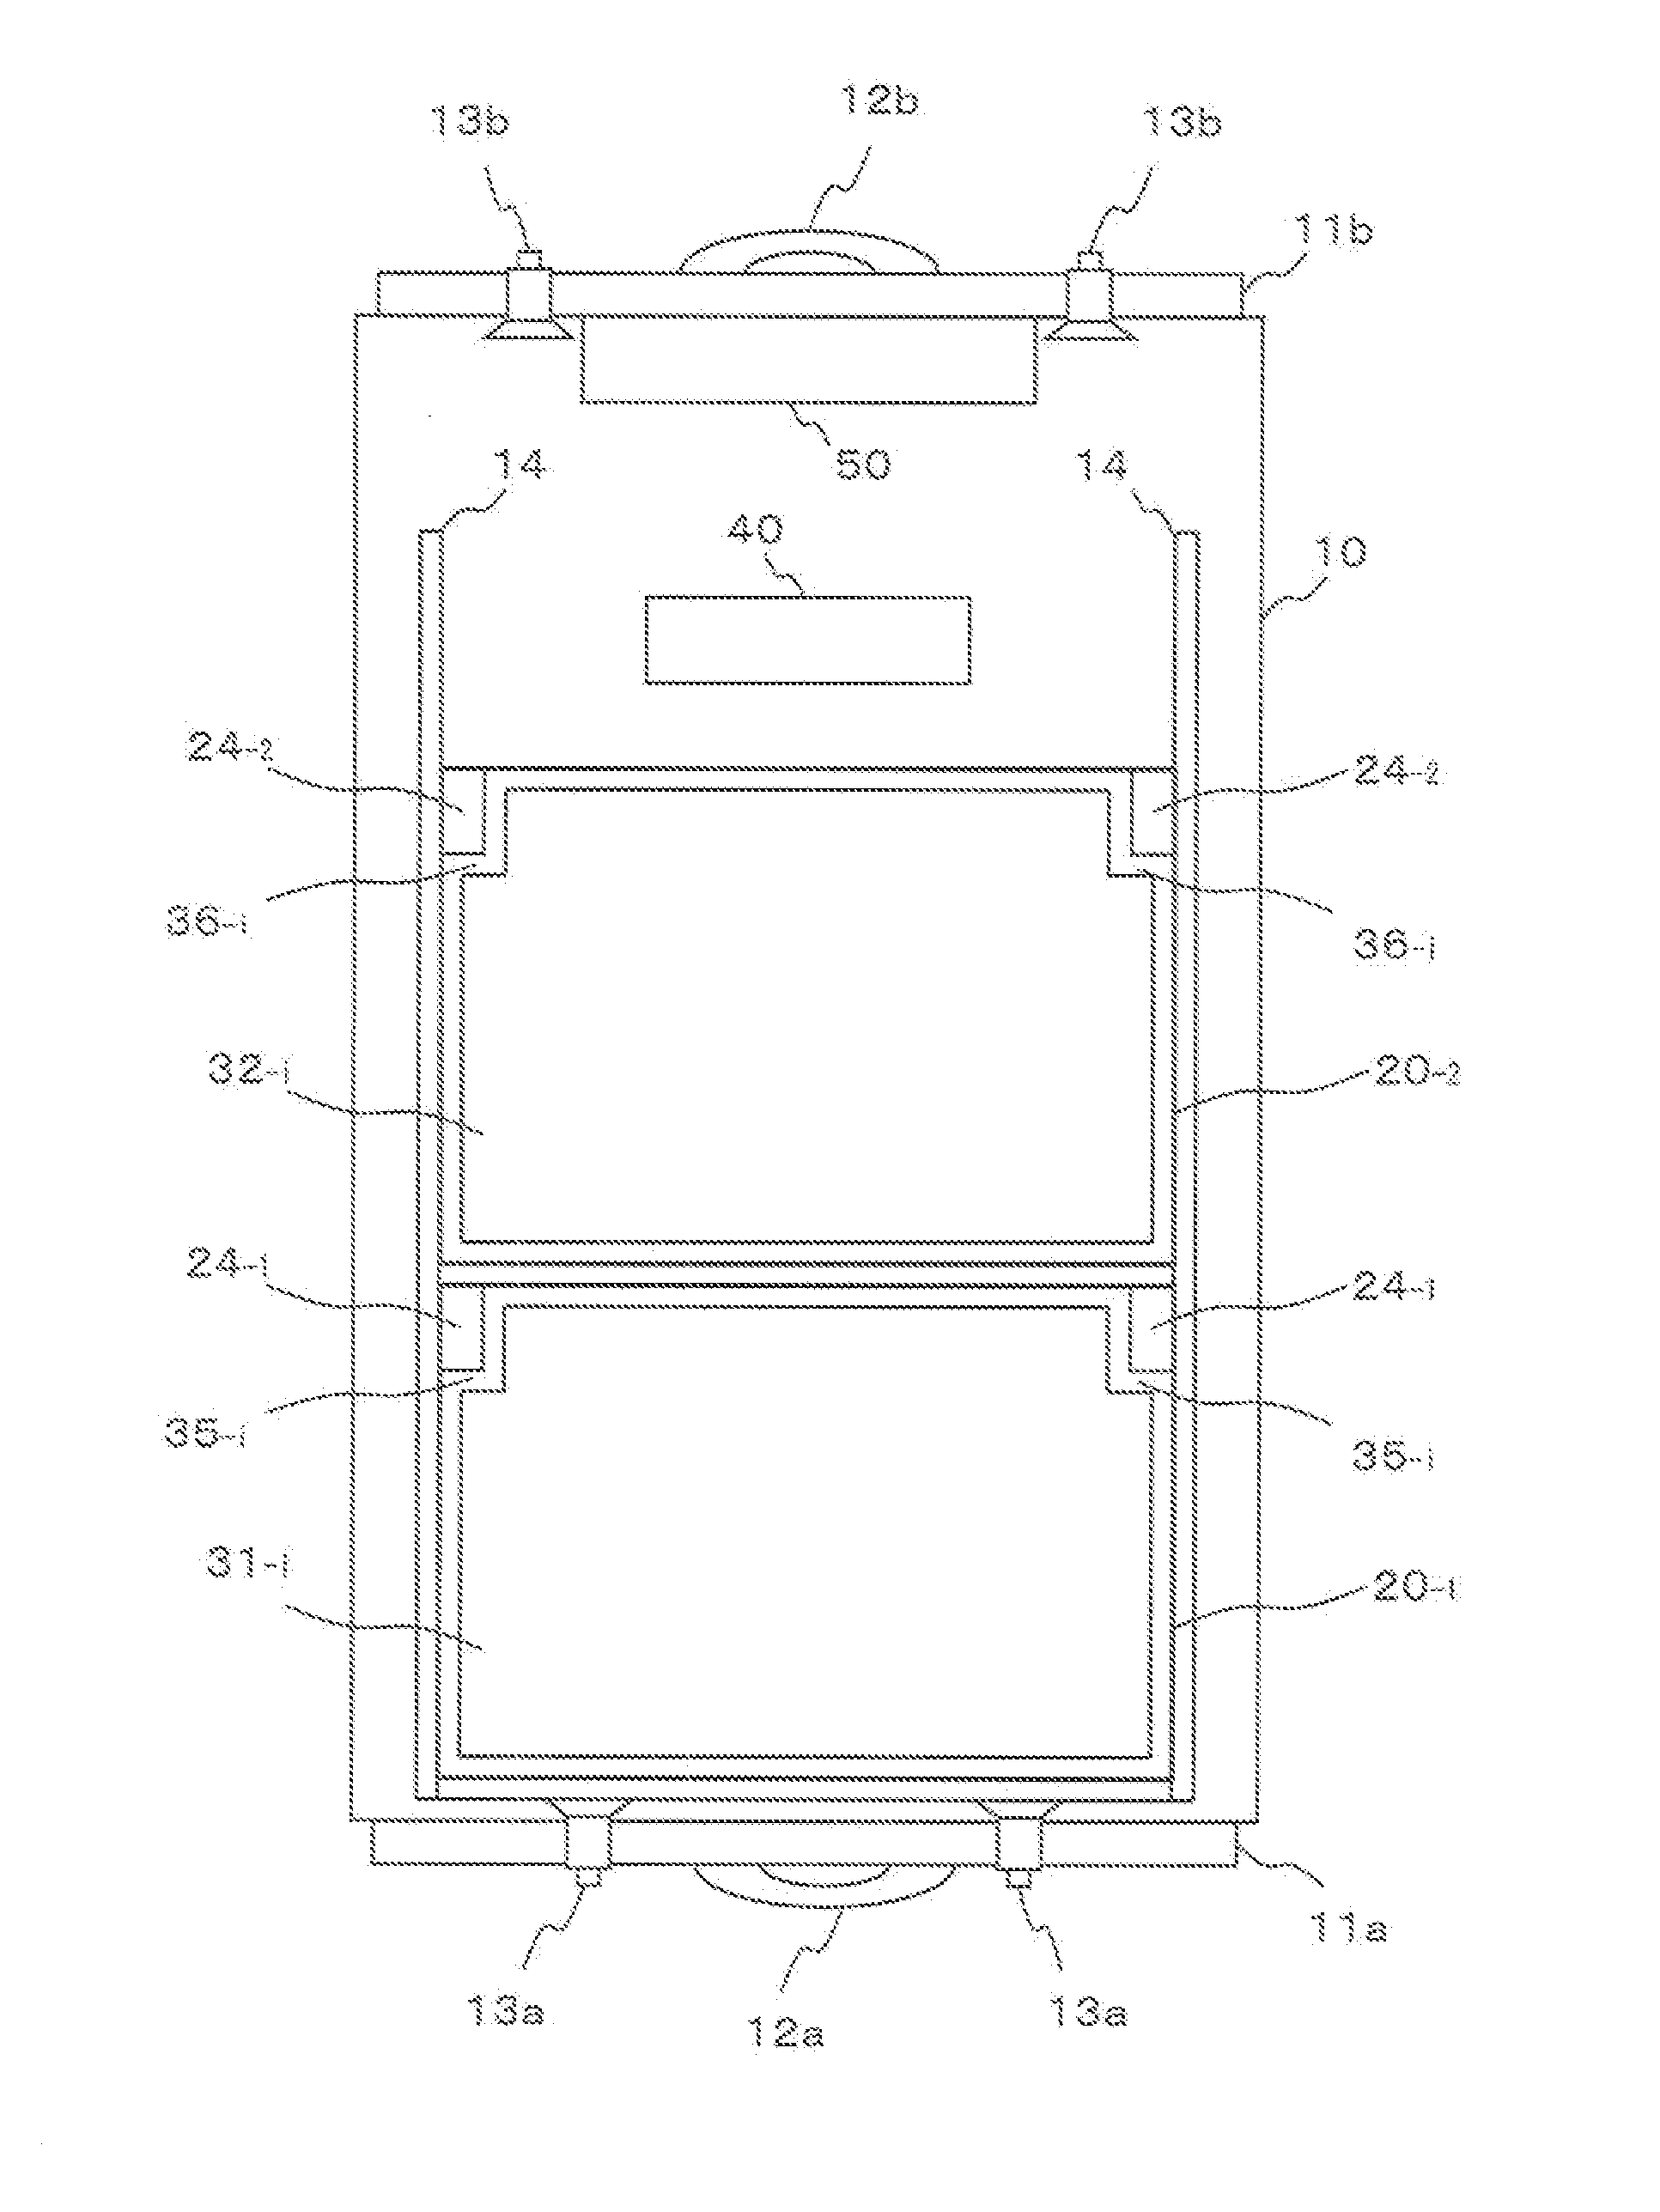 Anechoic chamber box for storing electronic apparatus